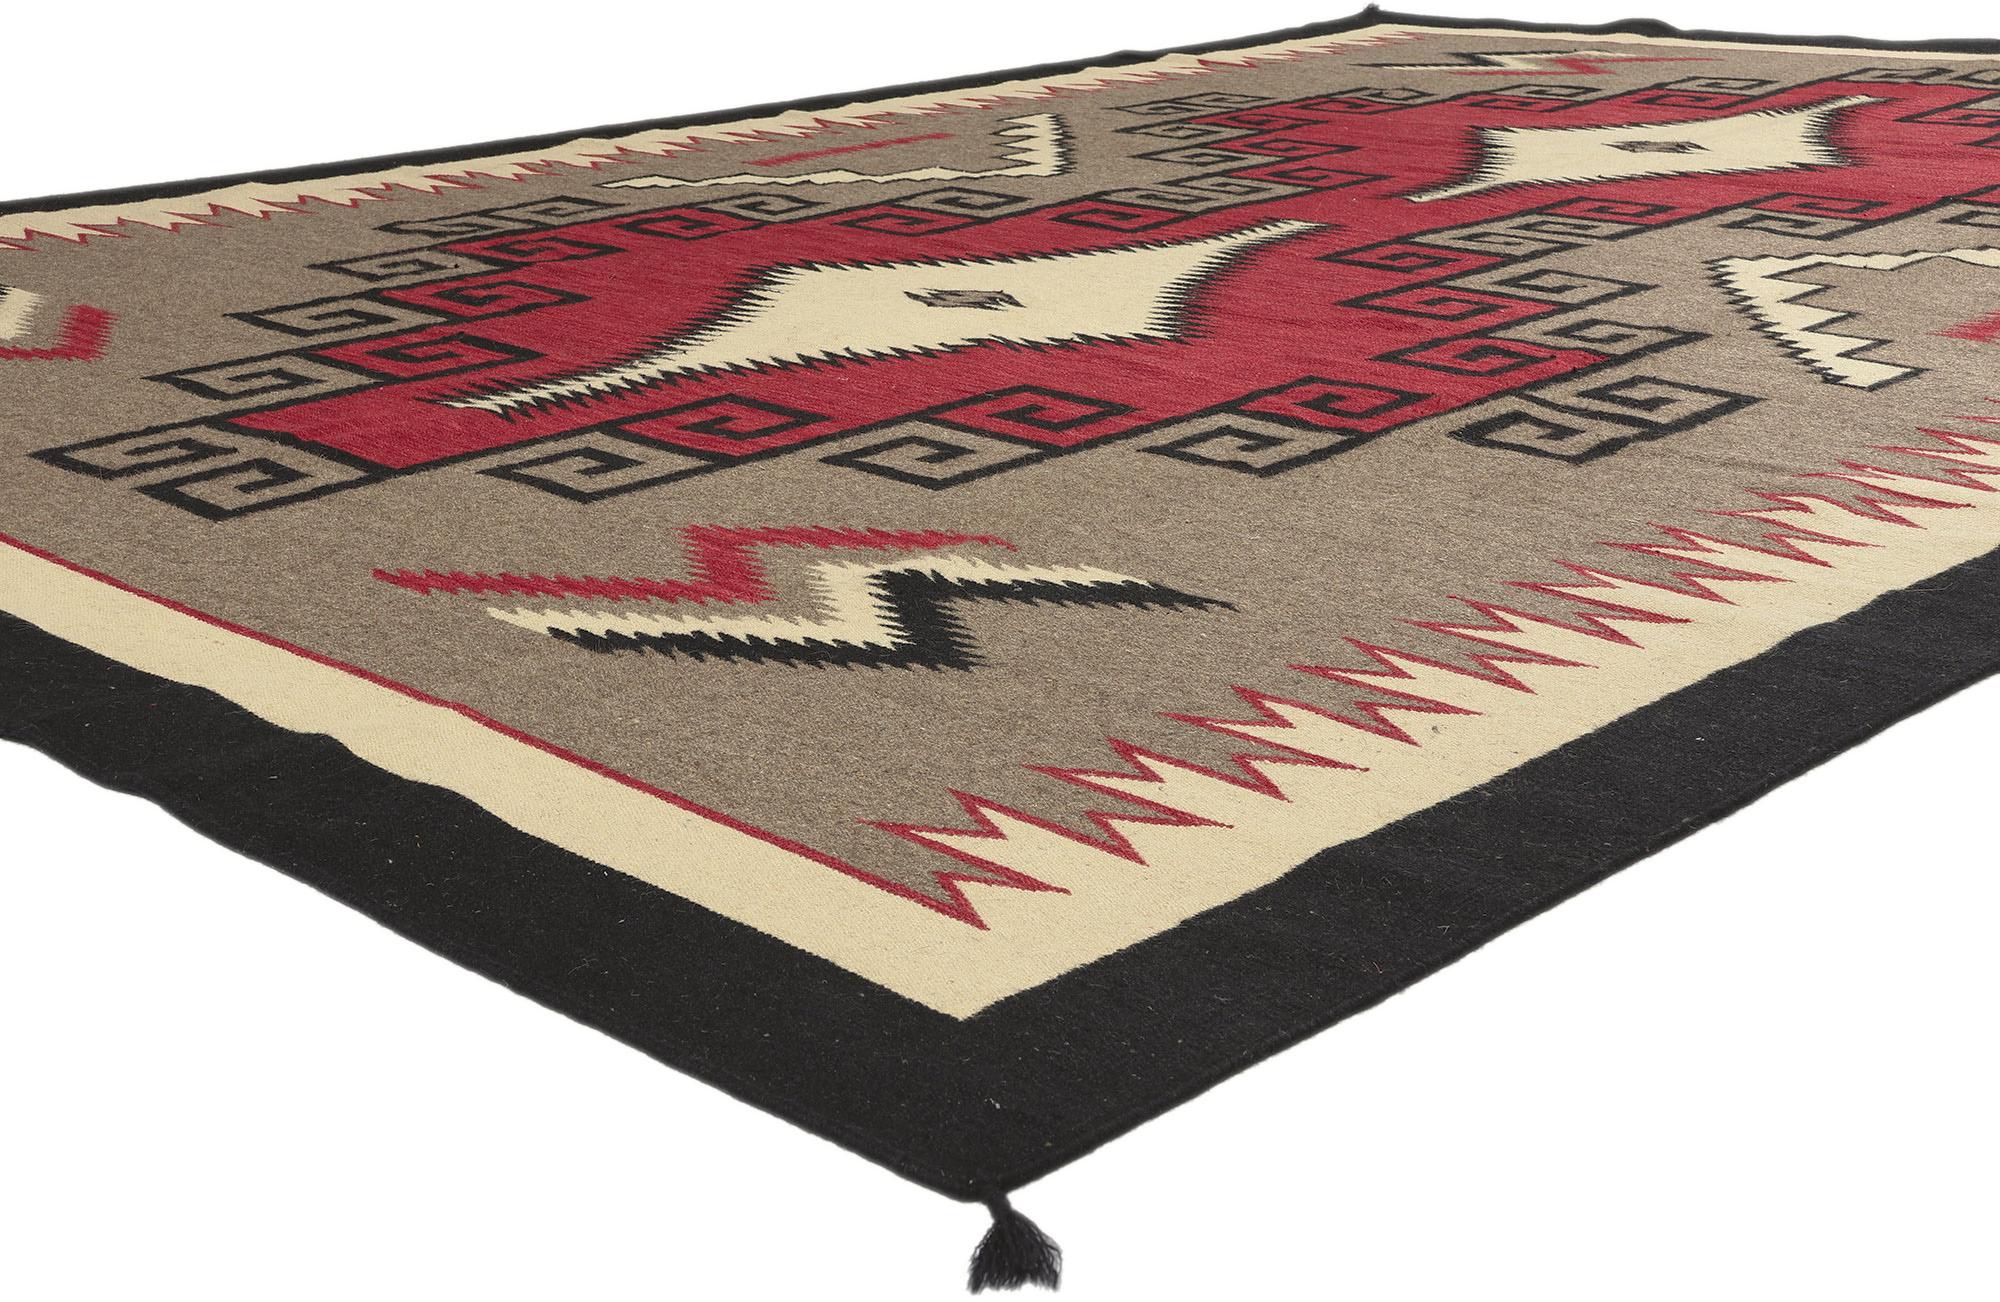 81036 Southwest Modern Ganado Navajo-Style Rug, 08'10 x 12'05. Embark on a captivating journey of contemporary elegance as you grace your space with this meticulously handwoven wool Ganado Navajo-style rug. This enchanting carpet ride invites you